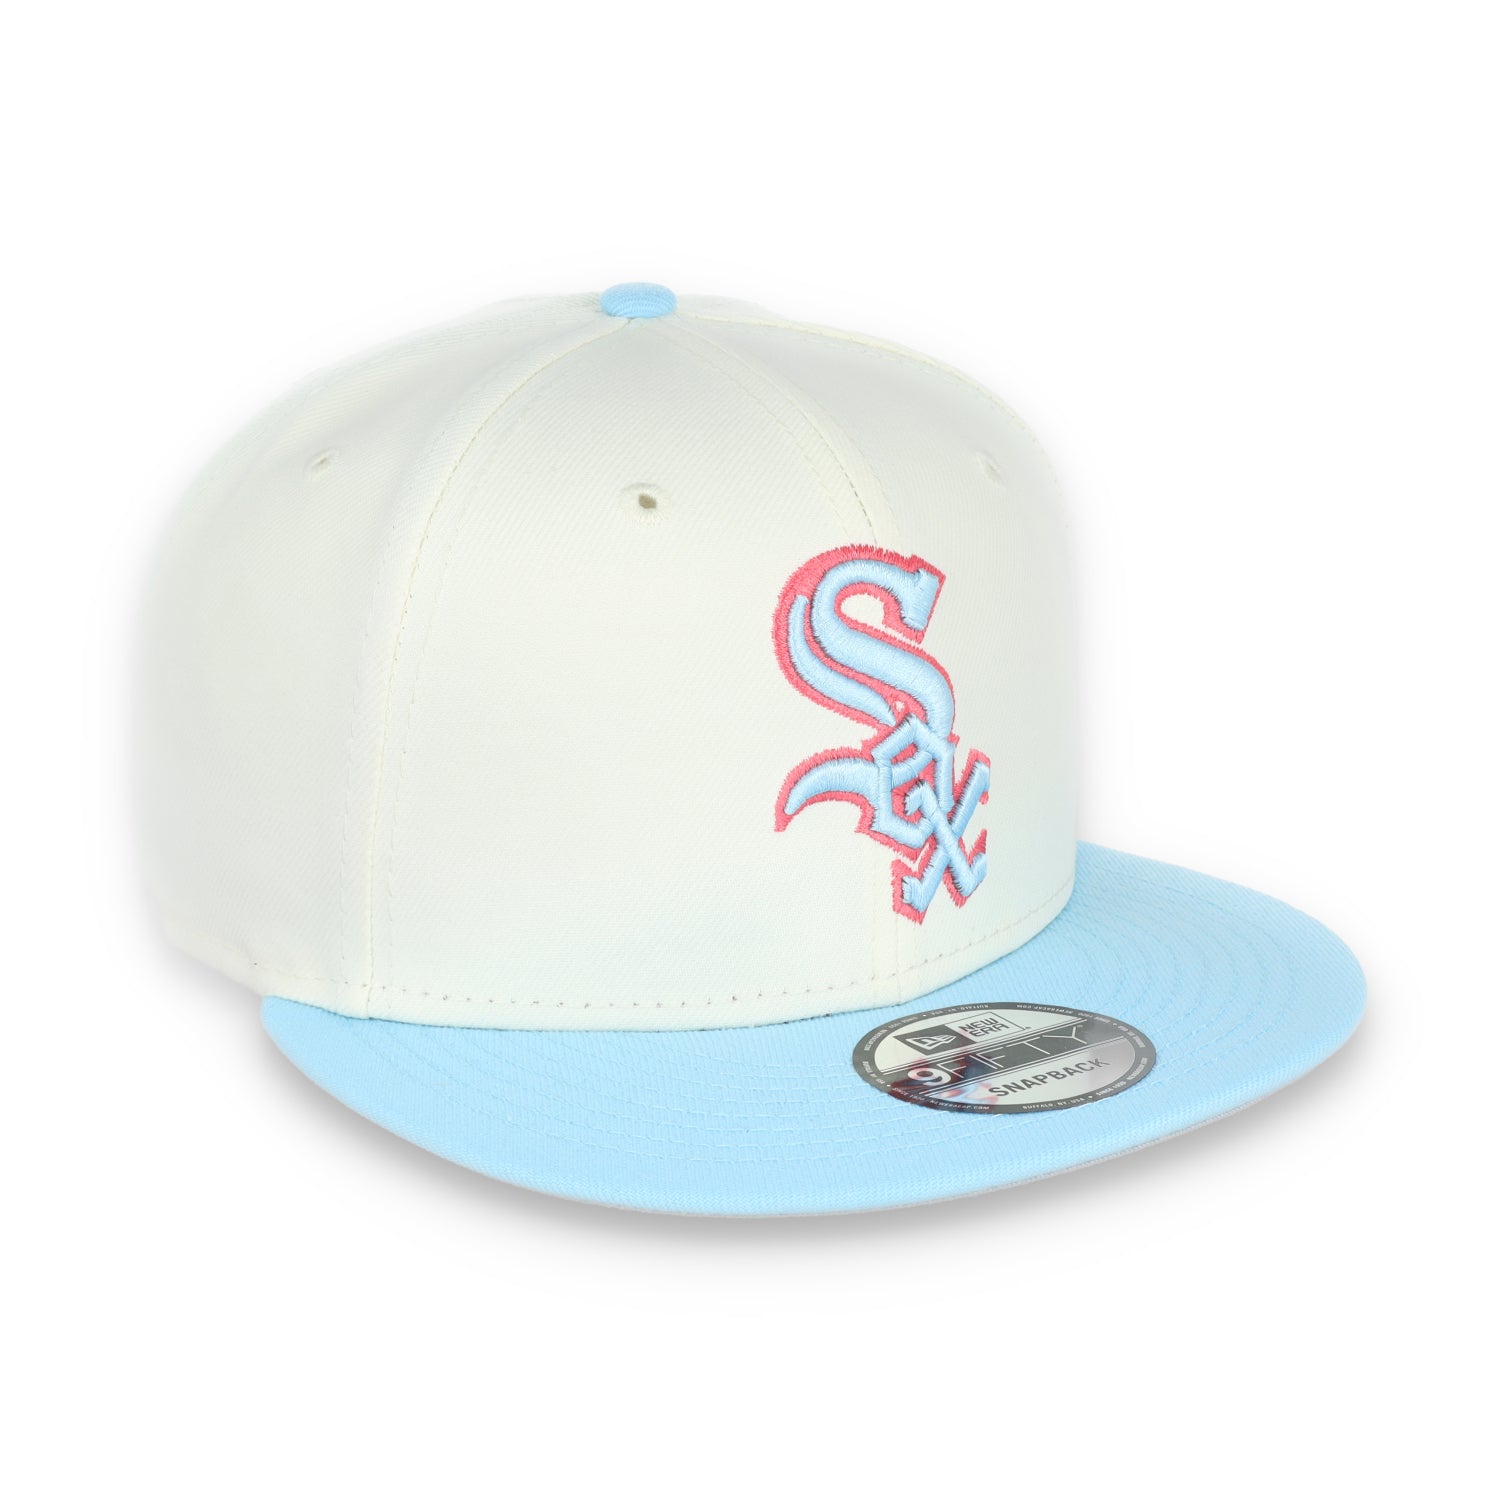 New Era Chicago White Sox 2-Tone Color Pack 9FIFTY Snapback Hat-Chrome/Baby Blue